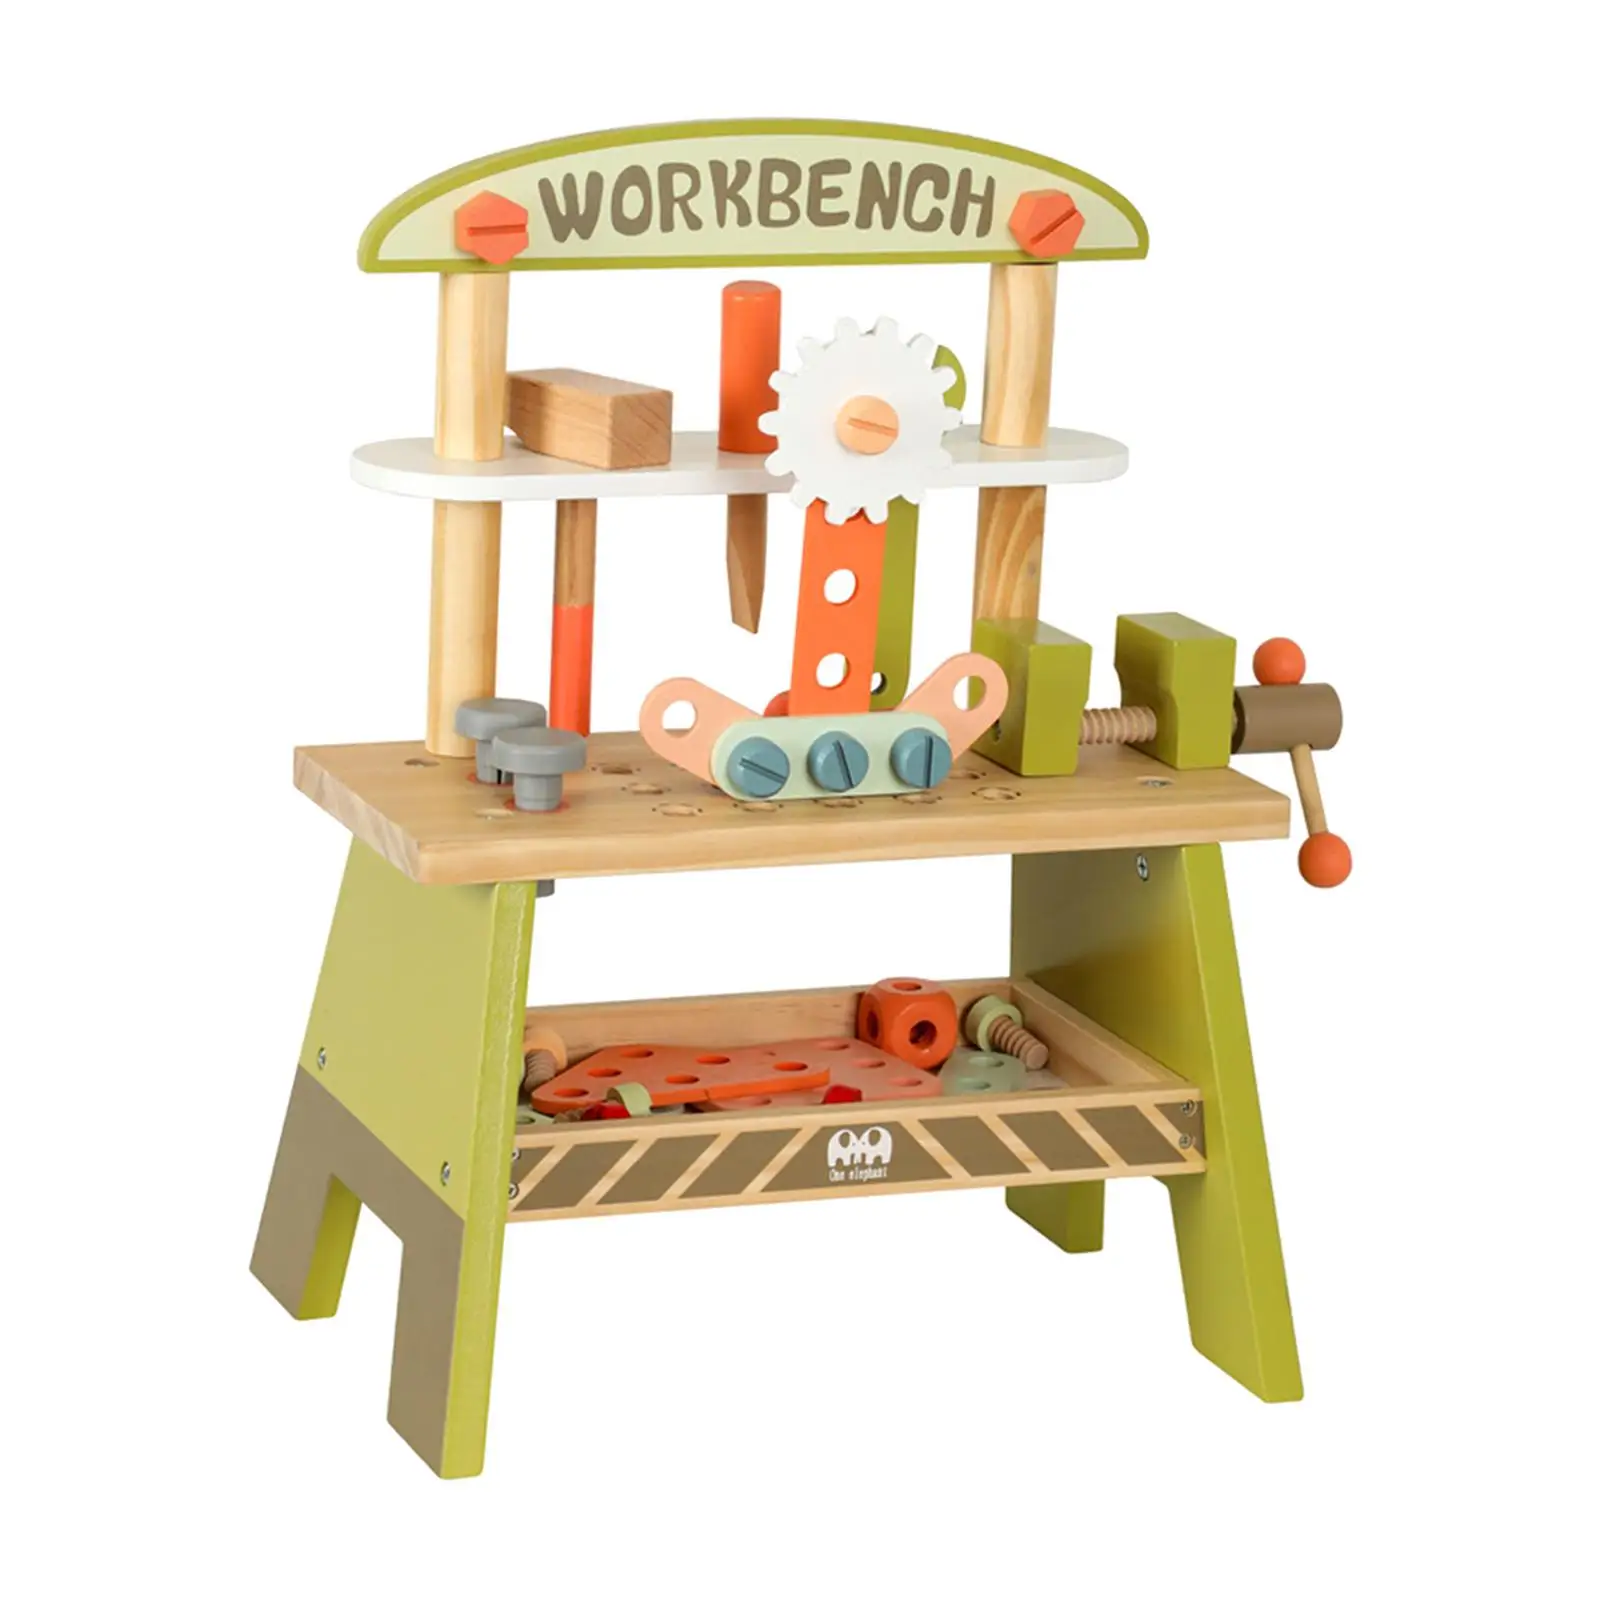 

Pretend Play Construction Toy DIY Kid's Wooden Tool Bench Toy for Child Holiday Present Ages 3+ Christmas Gifts Easy to Assemble